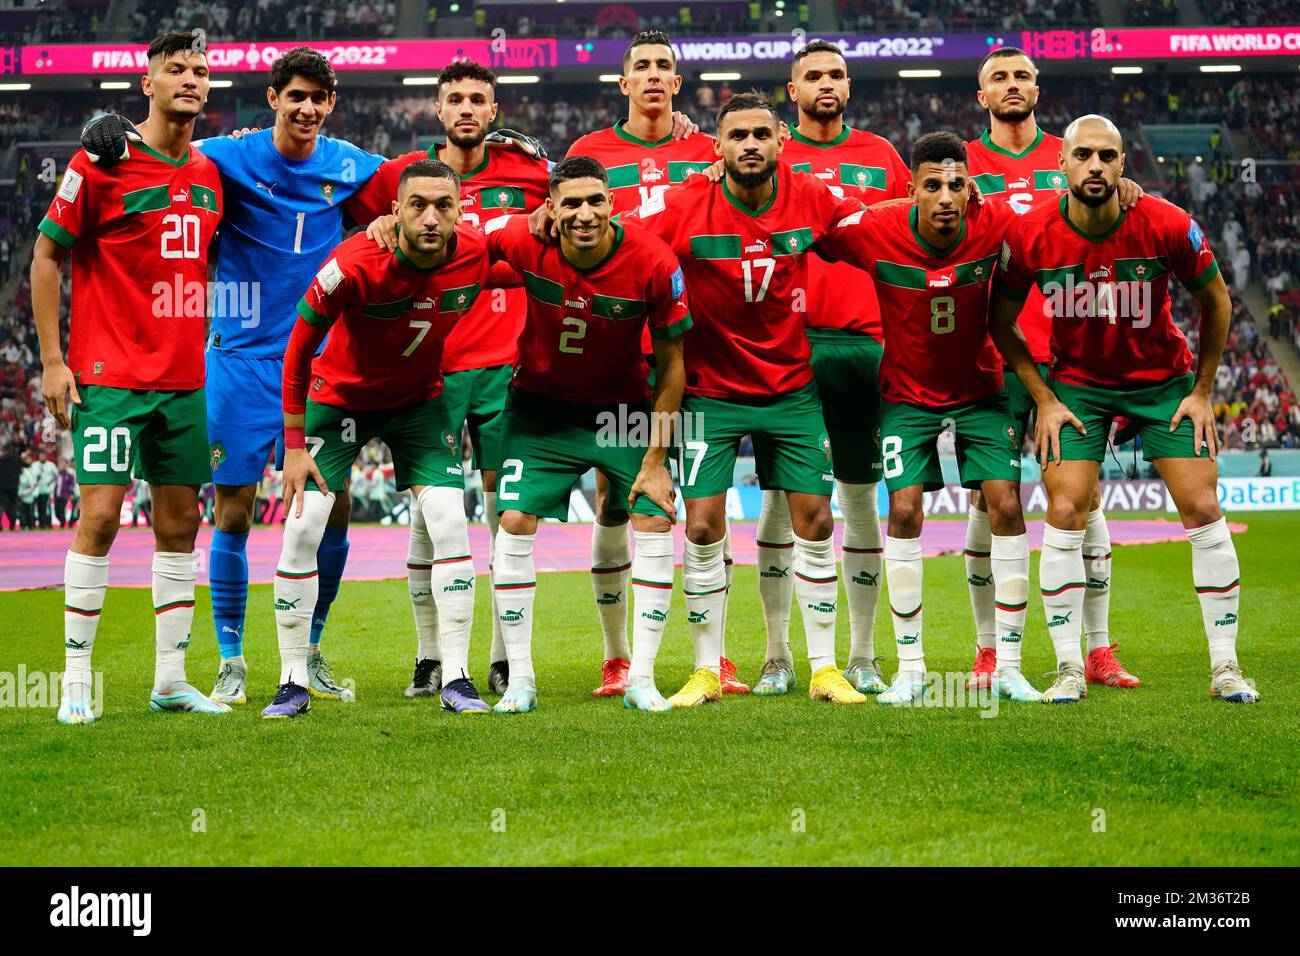 Morocco team group during the FIFA World Cup Qatar 2022 match, Semi-final  between Frtance and Morocco played at Al Bayt Stadium on Dec 14, 2022 in Al  Khor Qatar. (Photo by Bagu